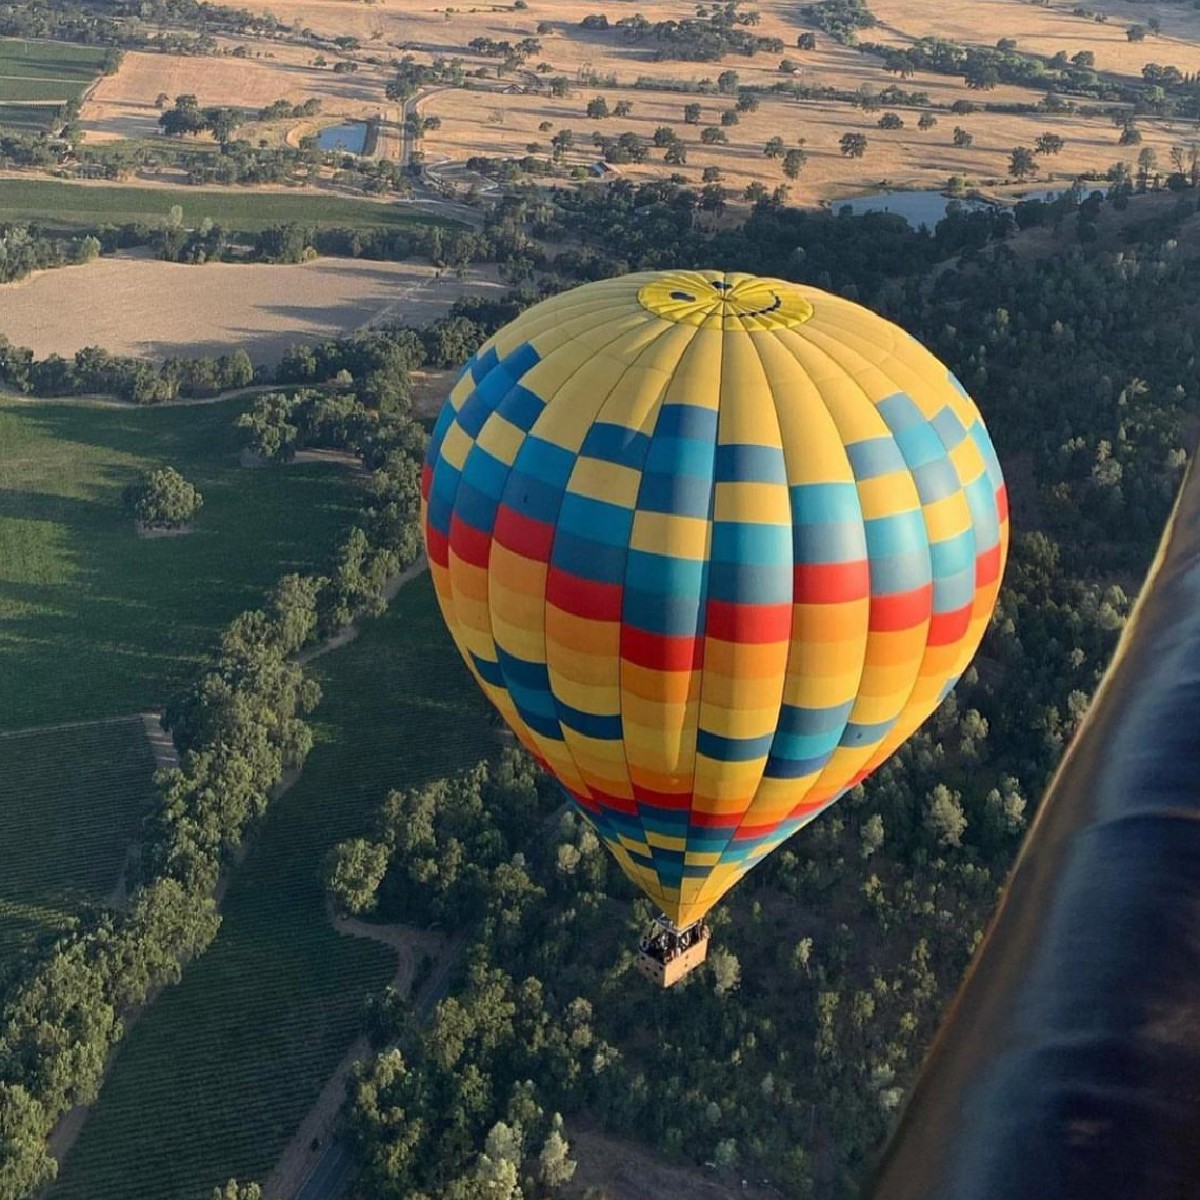 Up-up and away! 🎈Some of the best views of Downtown Napa are on a balloon excursion. The clear skies, puffy clouds and gentle breeze make for perfect conditions for a fall adventure.  📸: nvvalof ➡️ fal.cn/3sYHO